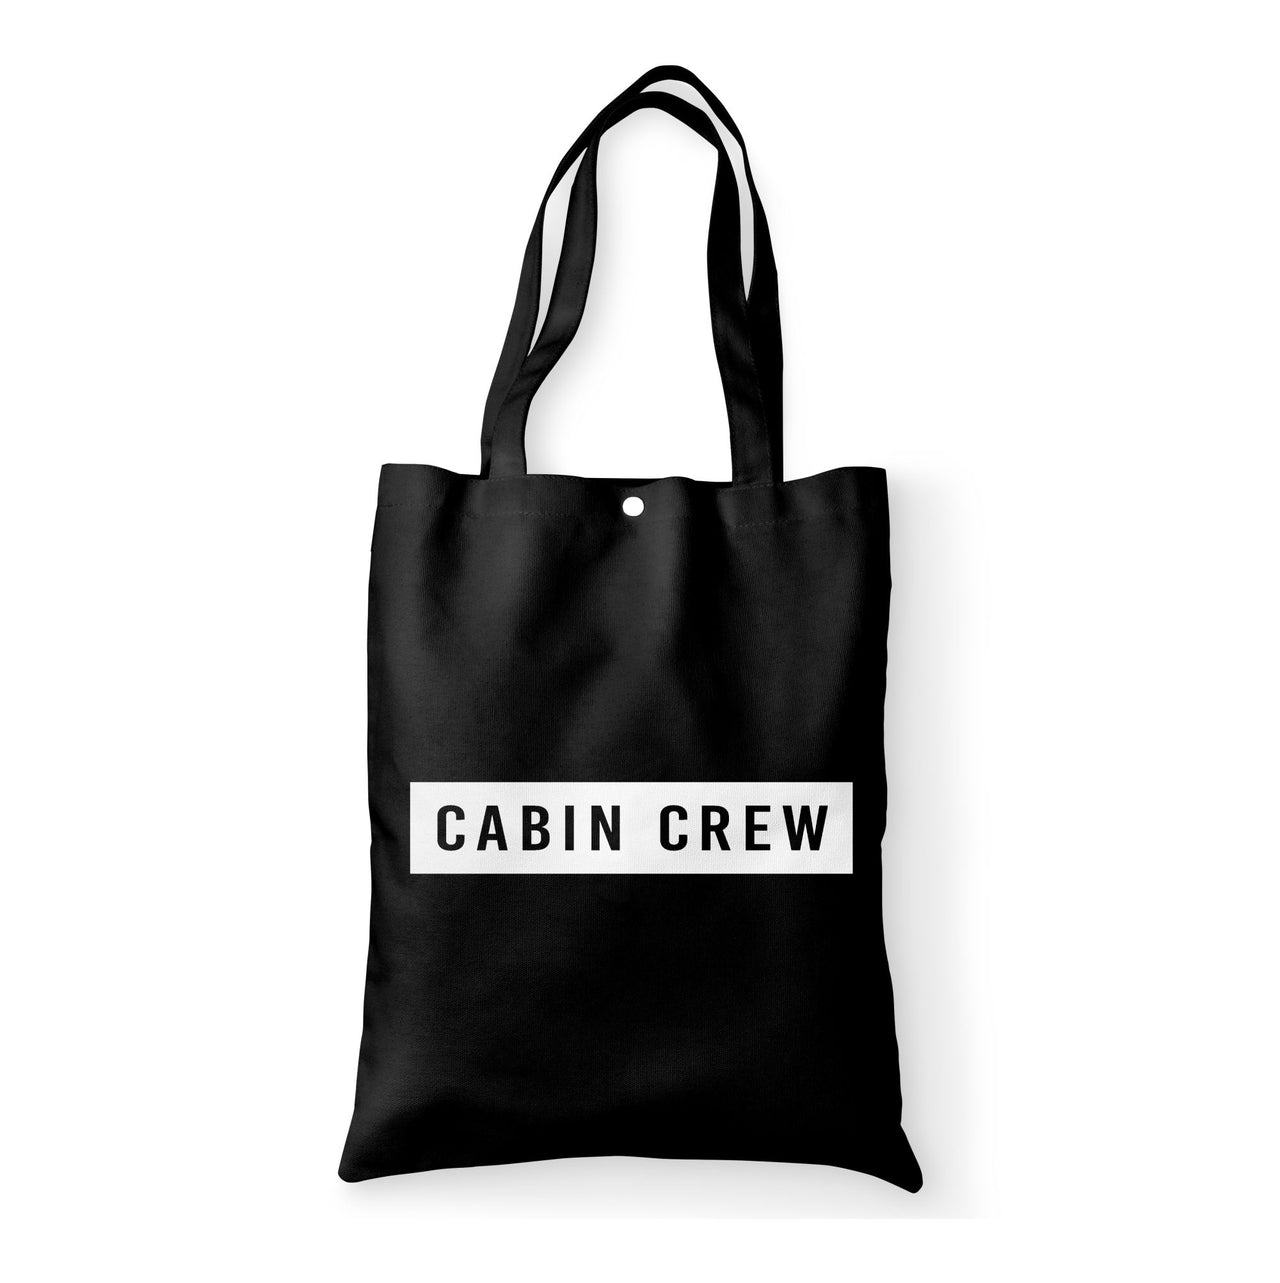 Cabin Crew Text Designed Tote Bags